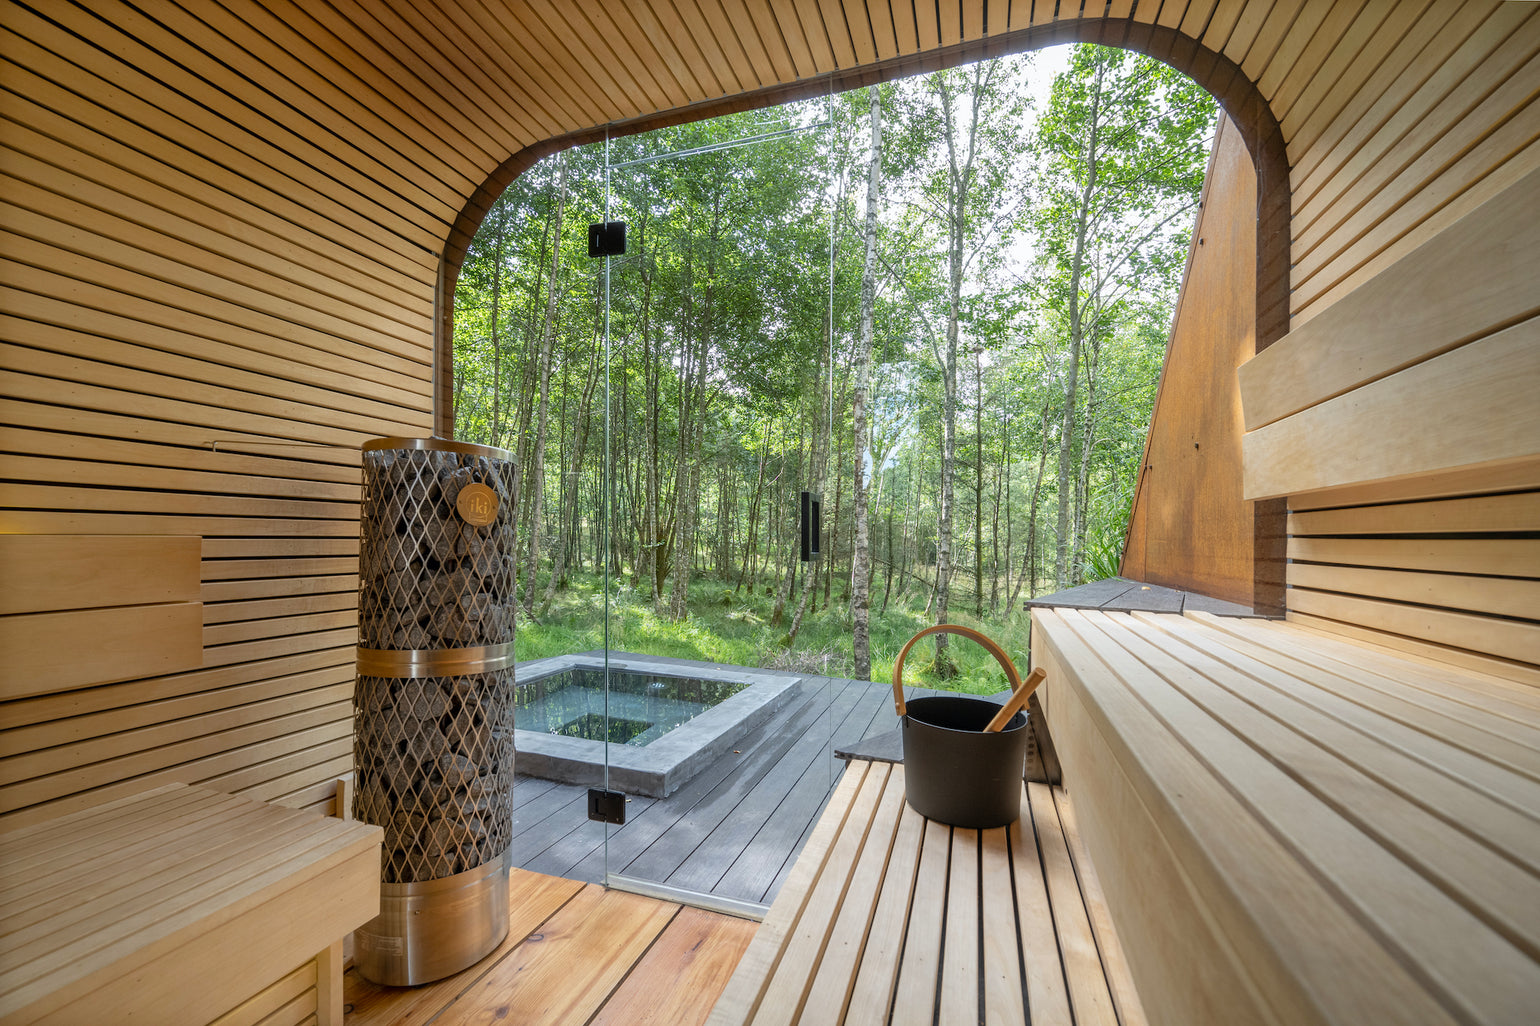 The inside of a sauna looking out to the trees in the distance